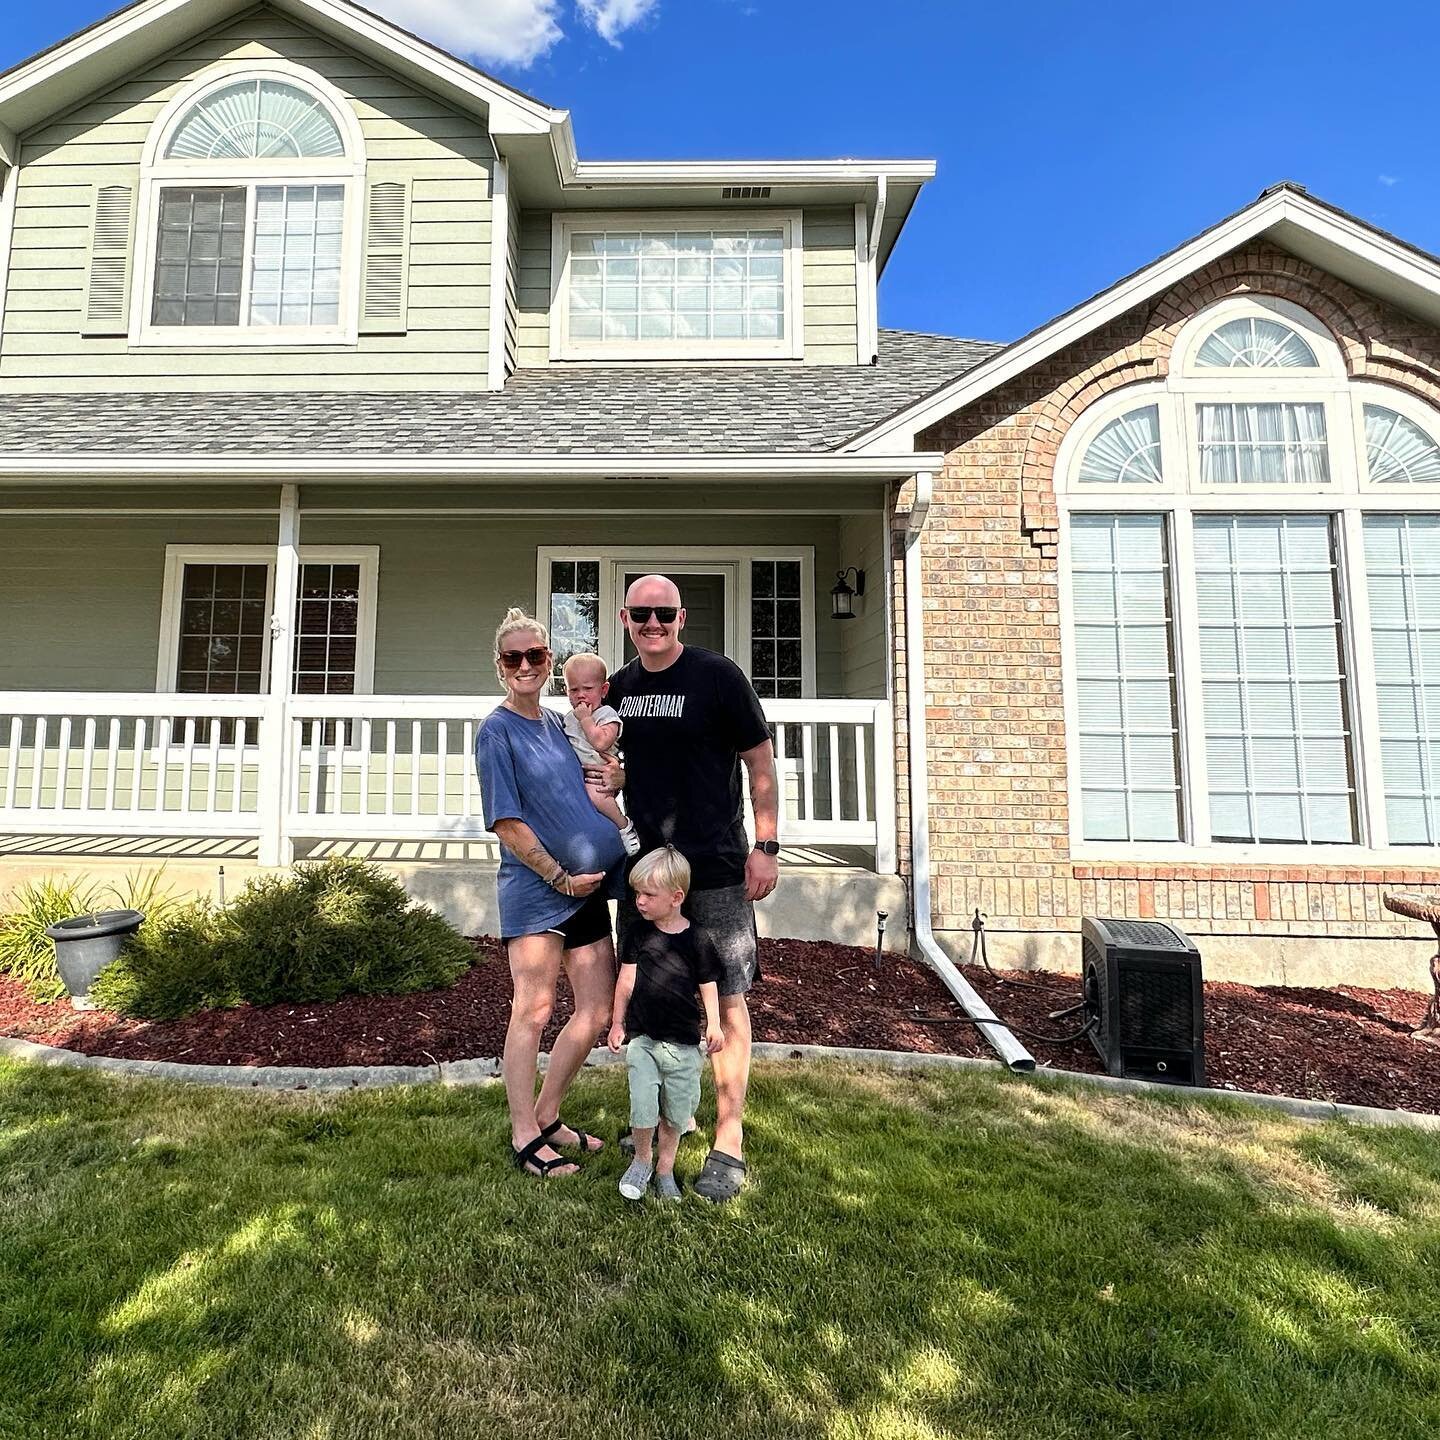 Congratulations are in order for our good friends, Matt and Sarah, as they move into their new Downriver home and their family grows. 🏡 

Swipe to see the beautiful floral arrangement prepared by @daisies.in.may to welcome them home.

 #Spokane
#Com